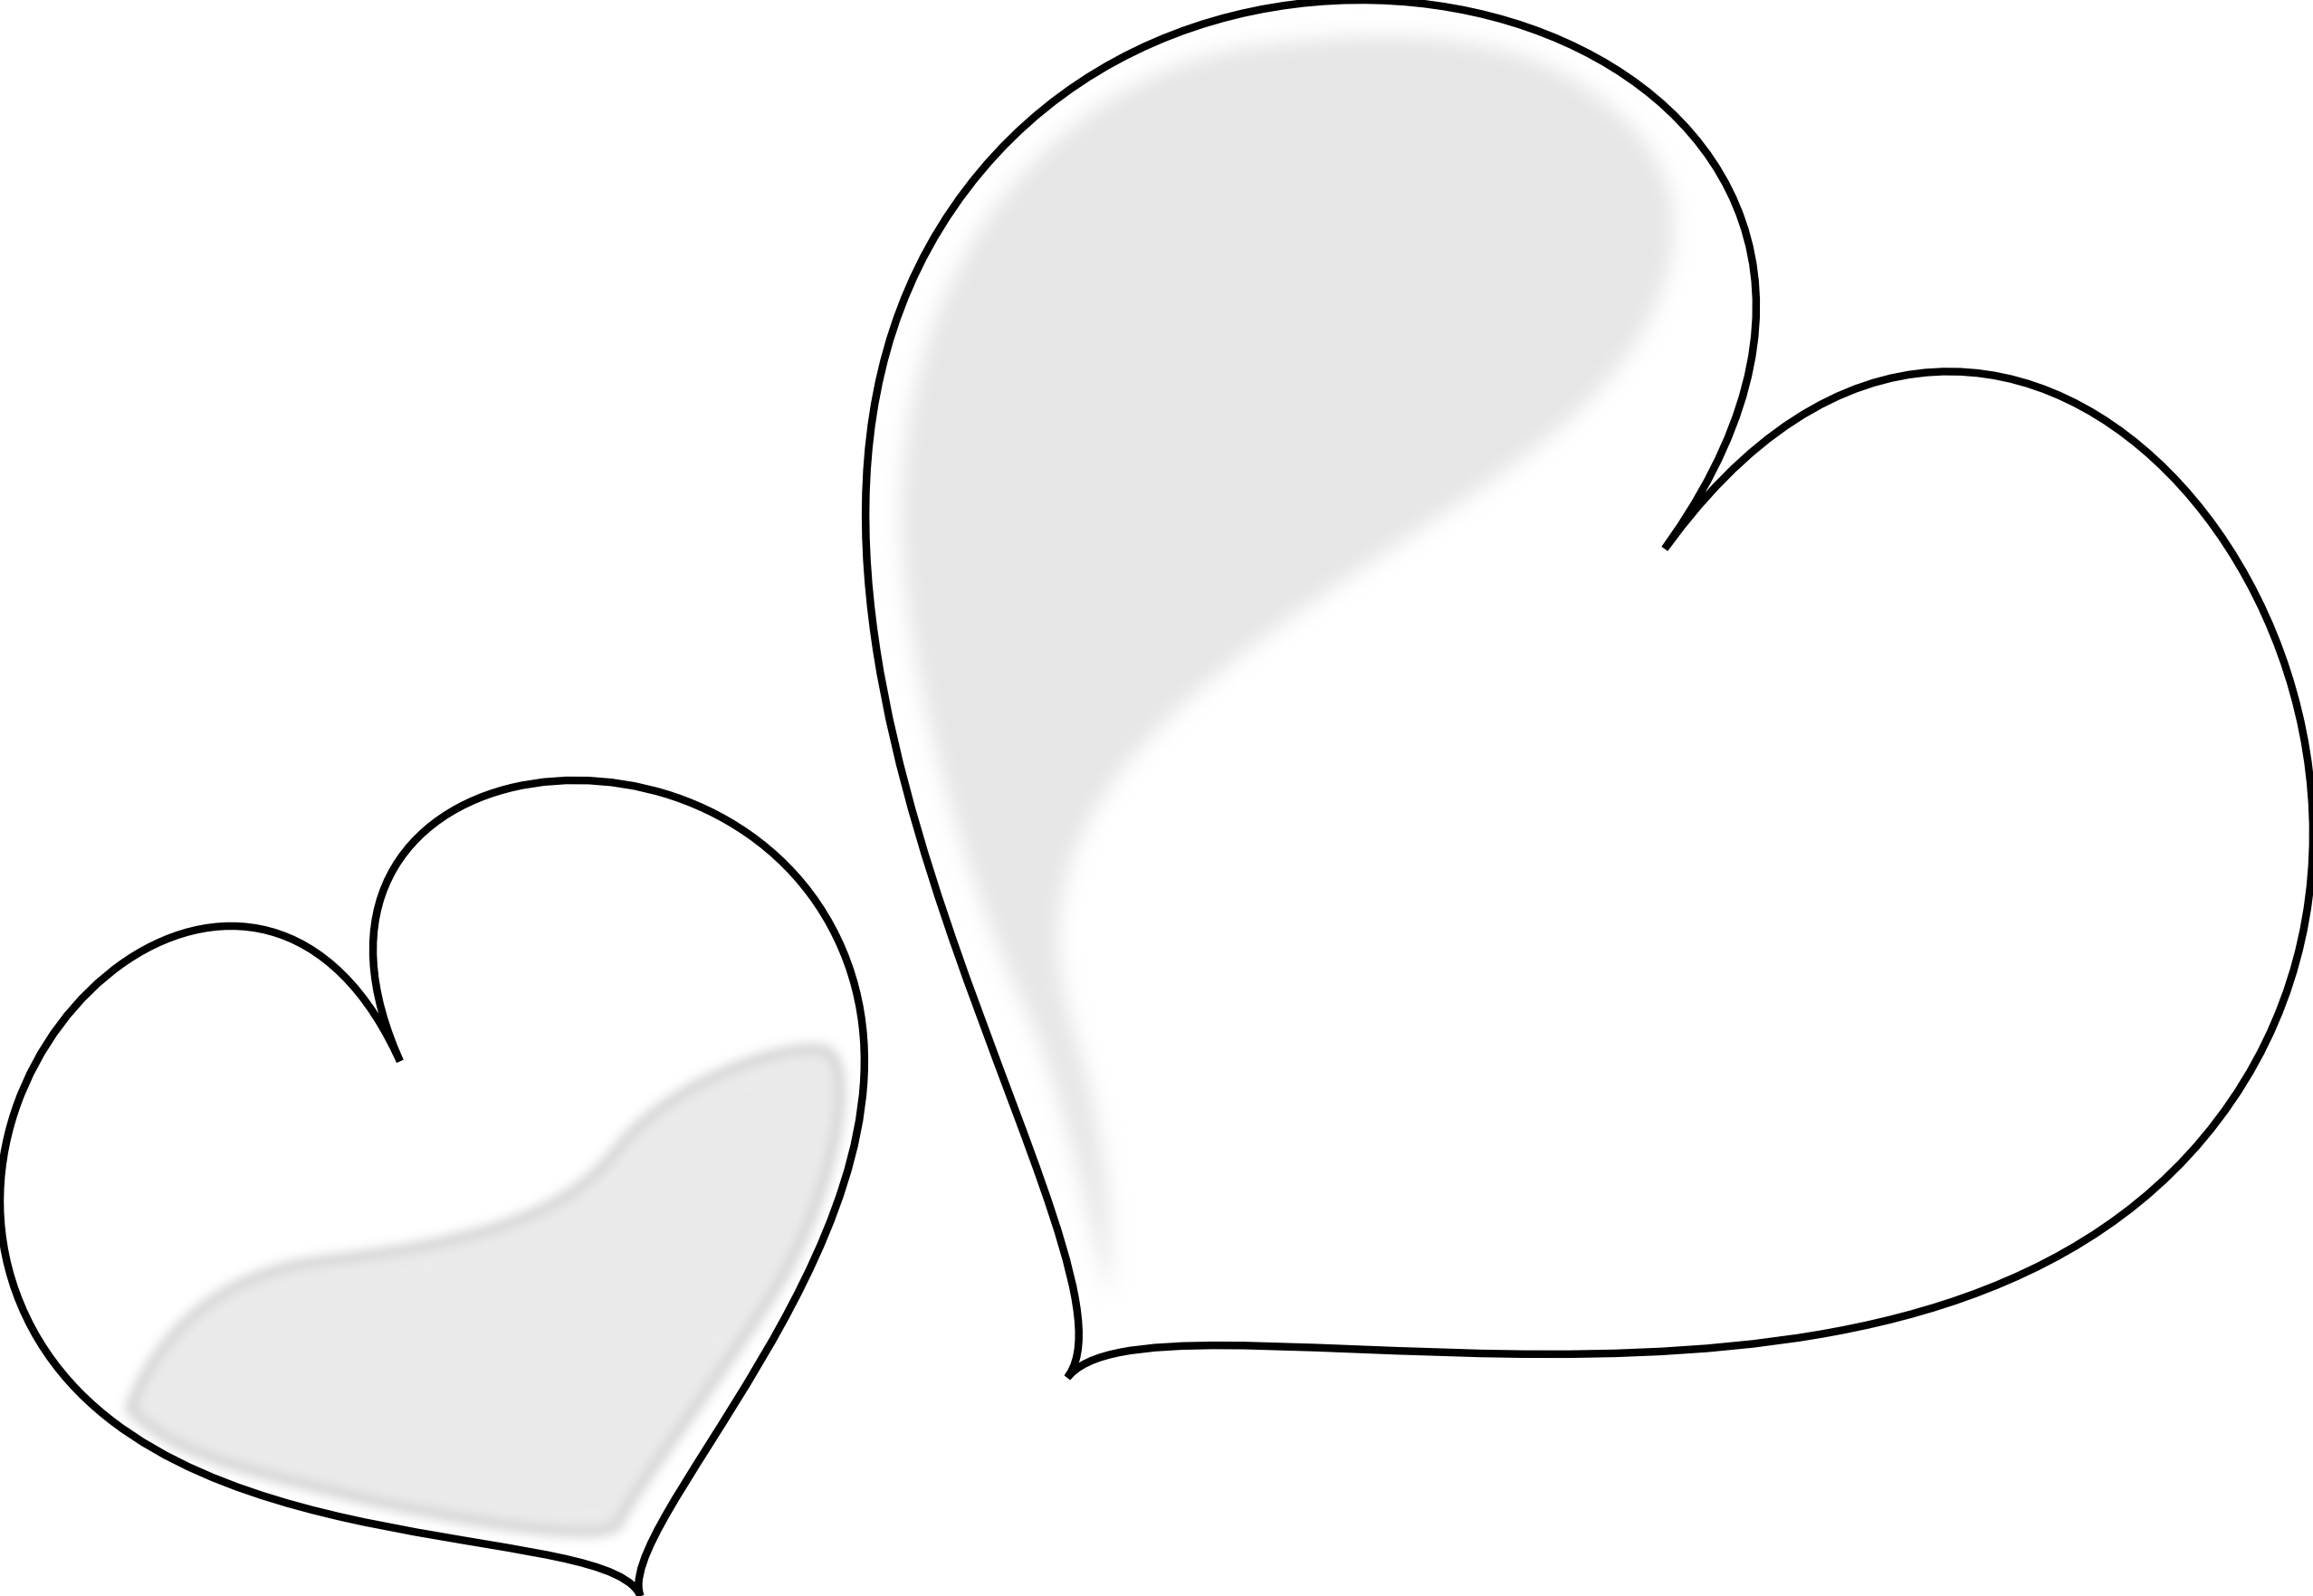 Heart clipart black and white black and white heart clipart 7